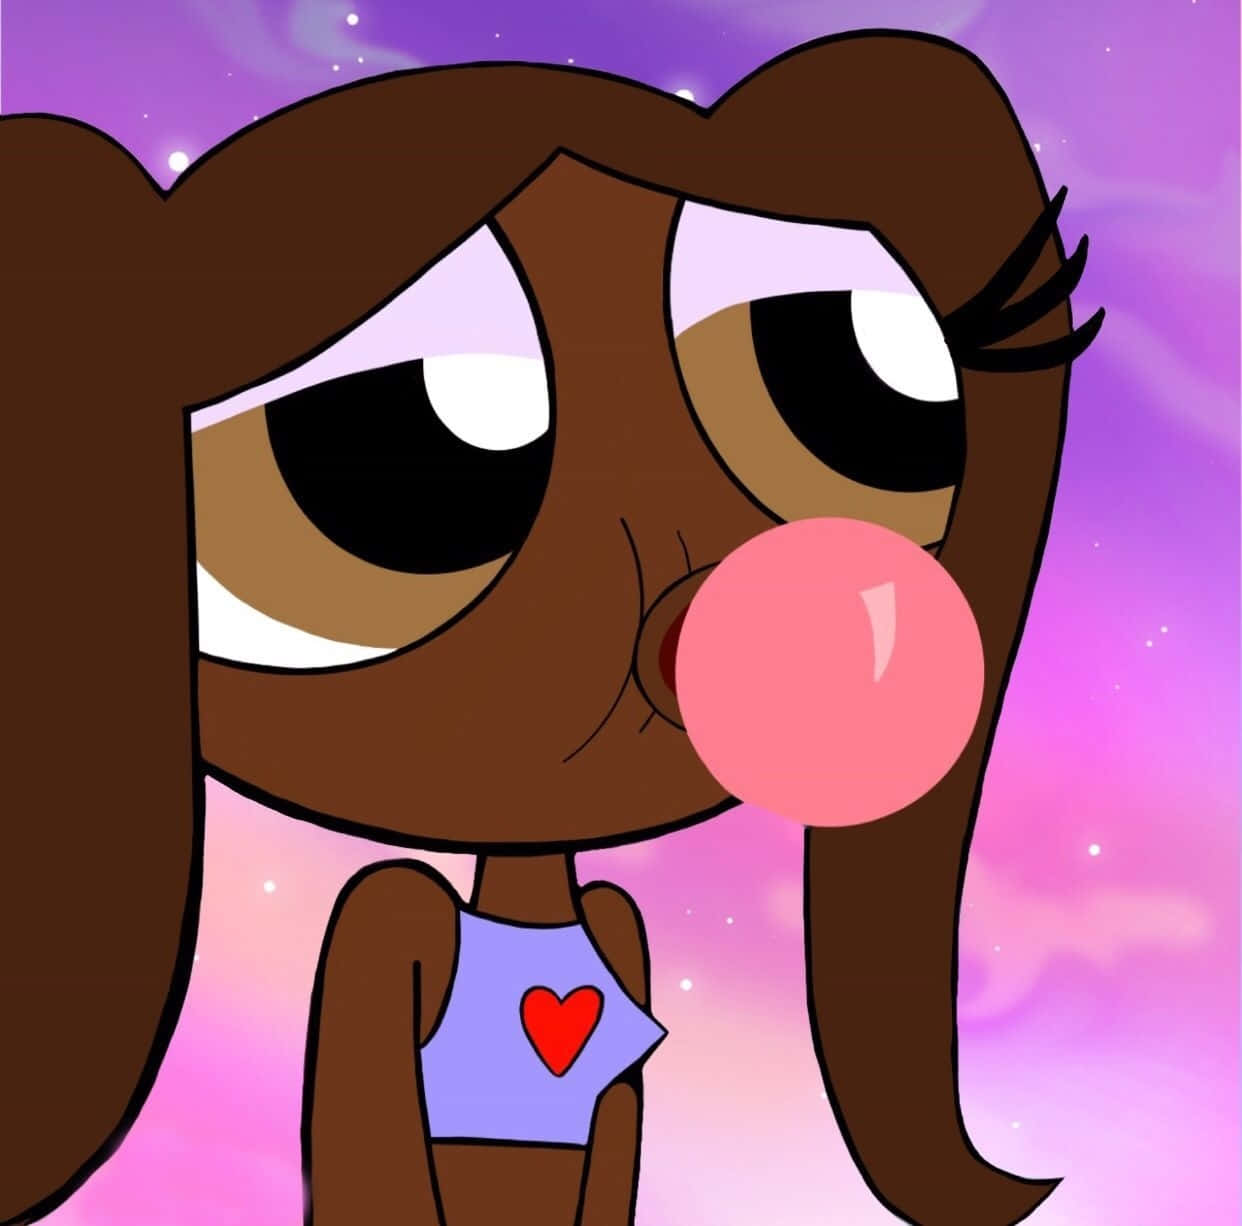 A Cartoon Girl Blowing Bubbles With A Heart On Her Face Wallpaper